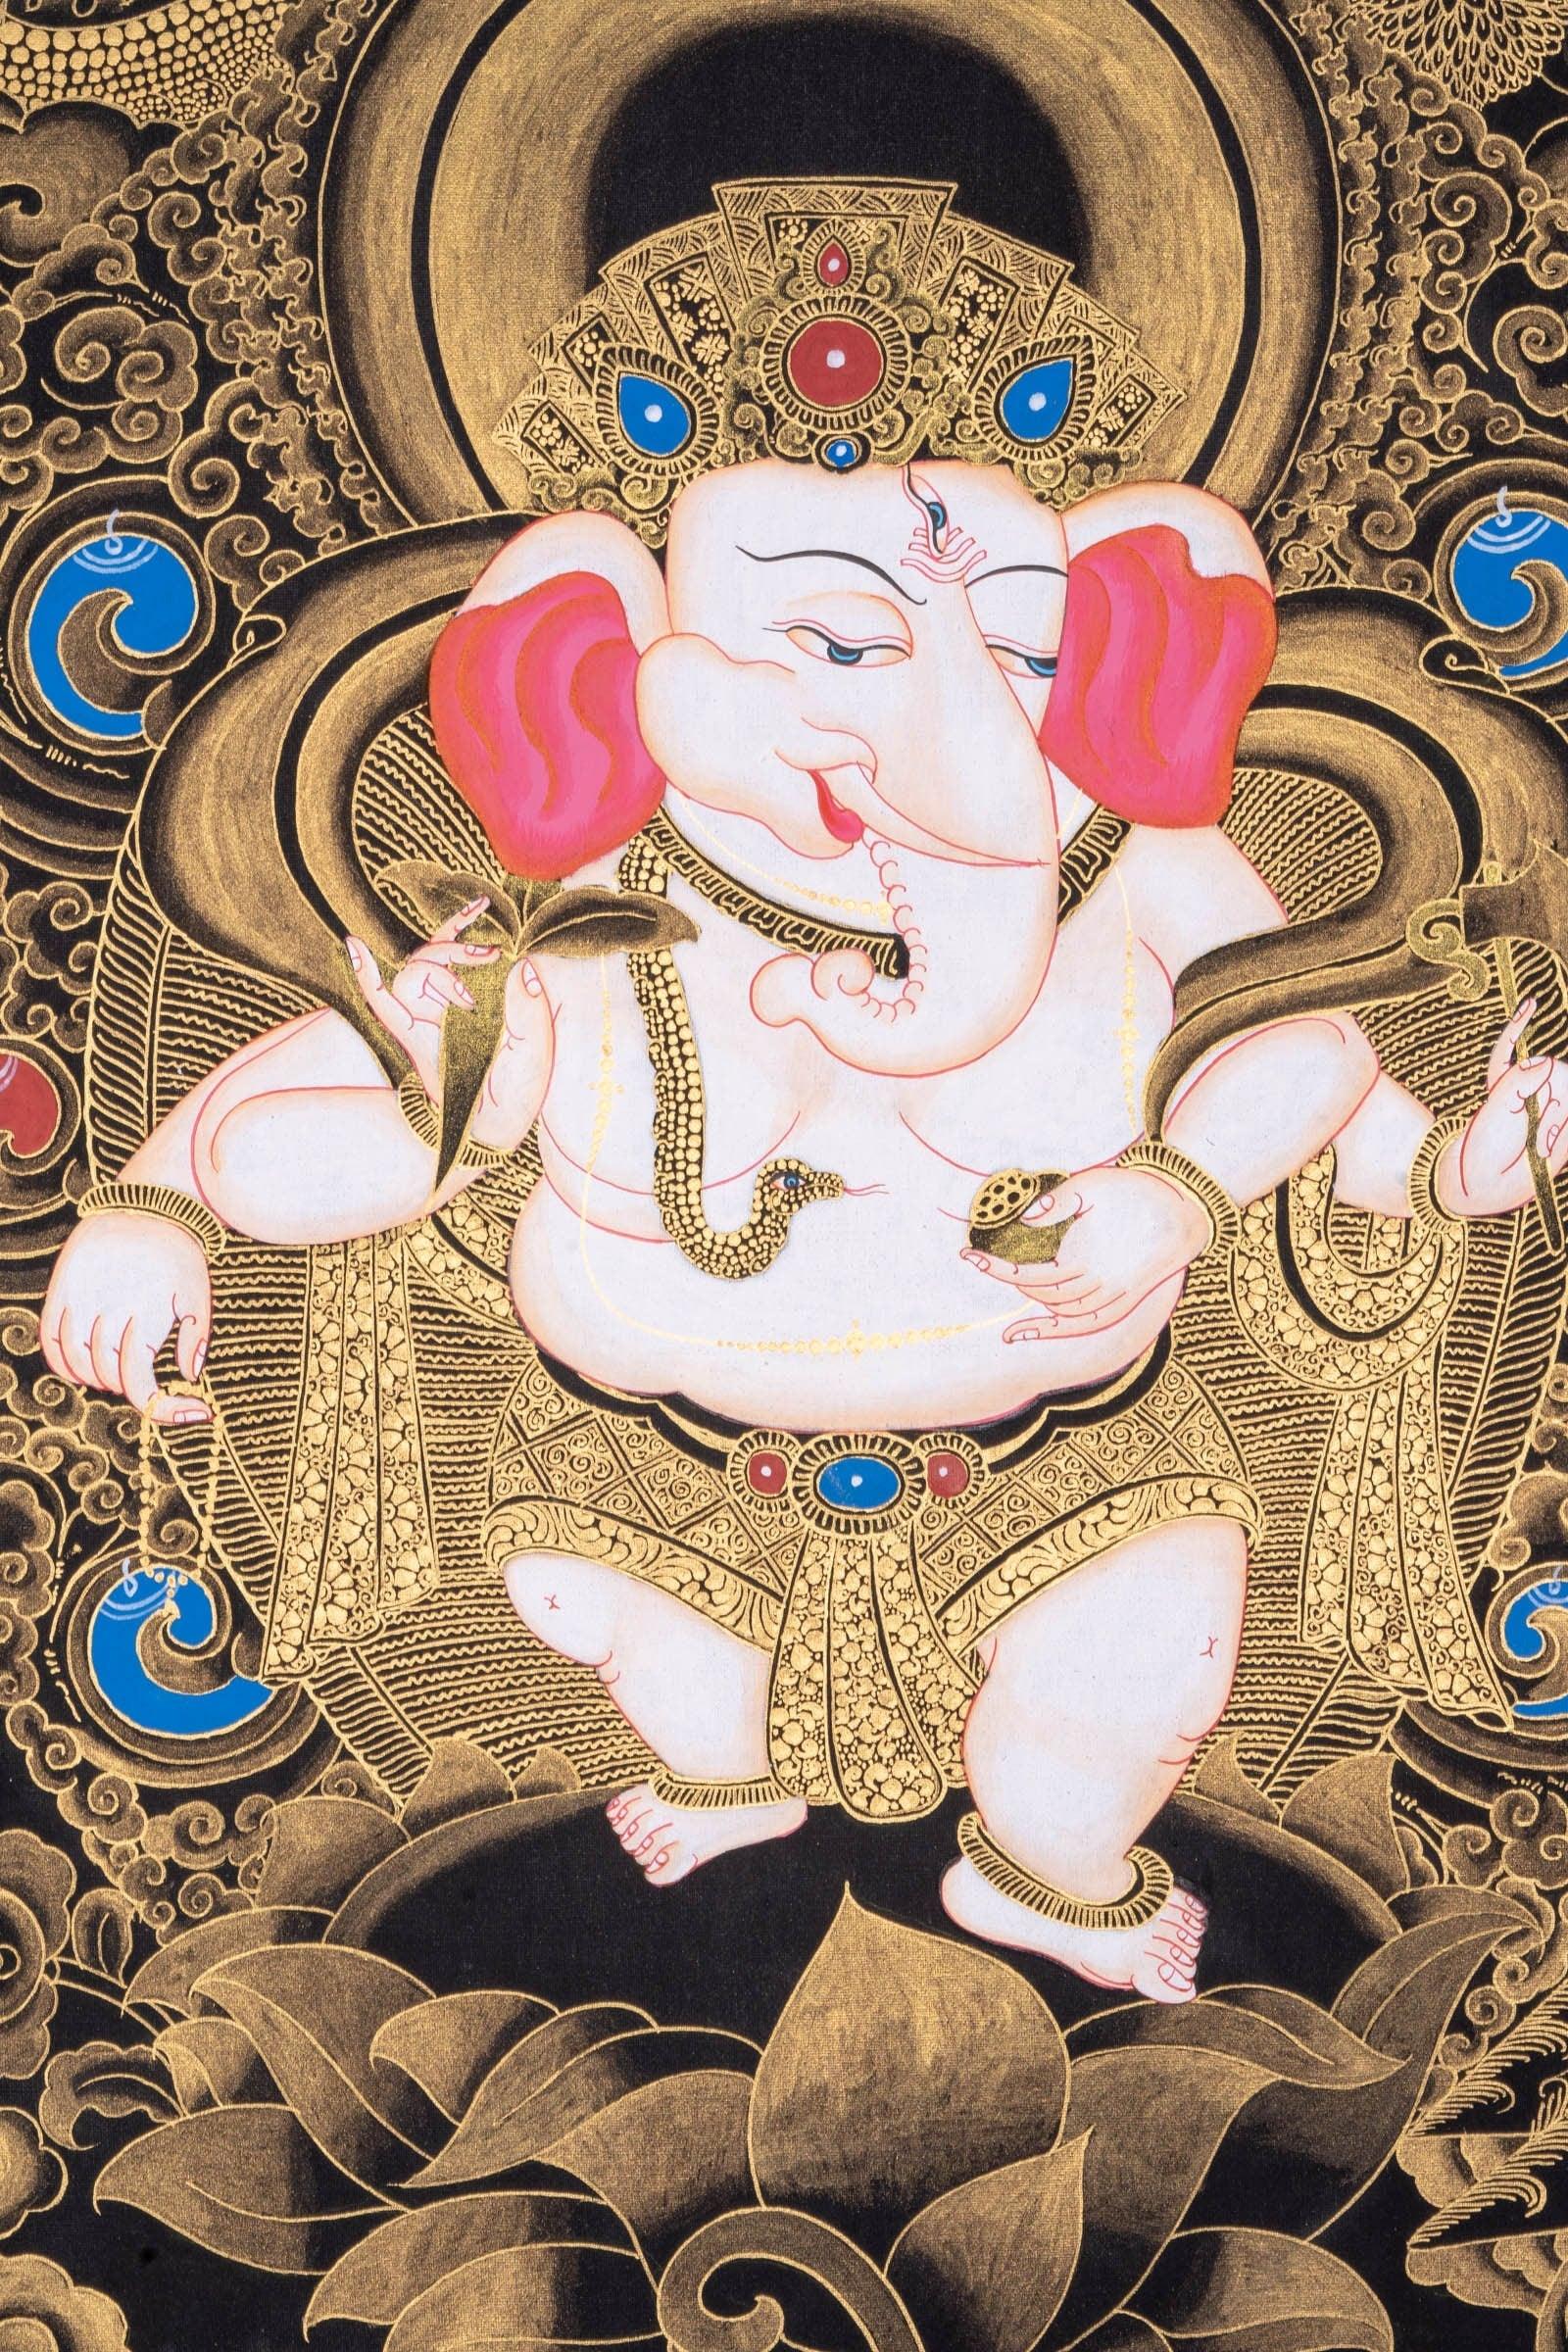 Buy Shree Ganesh Canvas Art Print by TEJAL BHAGAT. Code:PRT_5839_50246 -  Prints for Sale online in India.